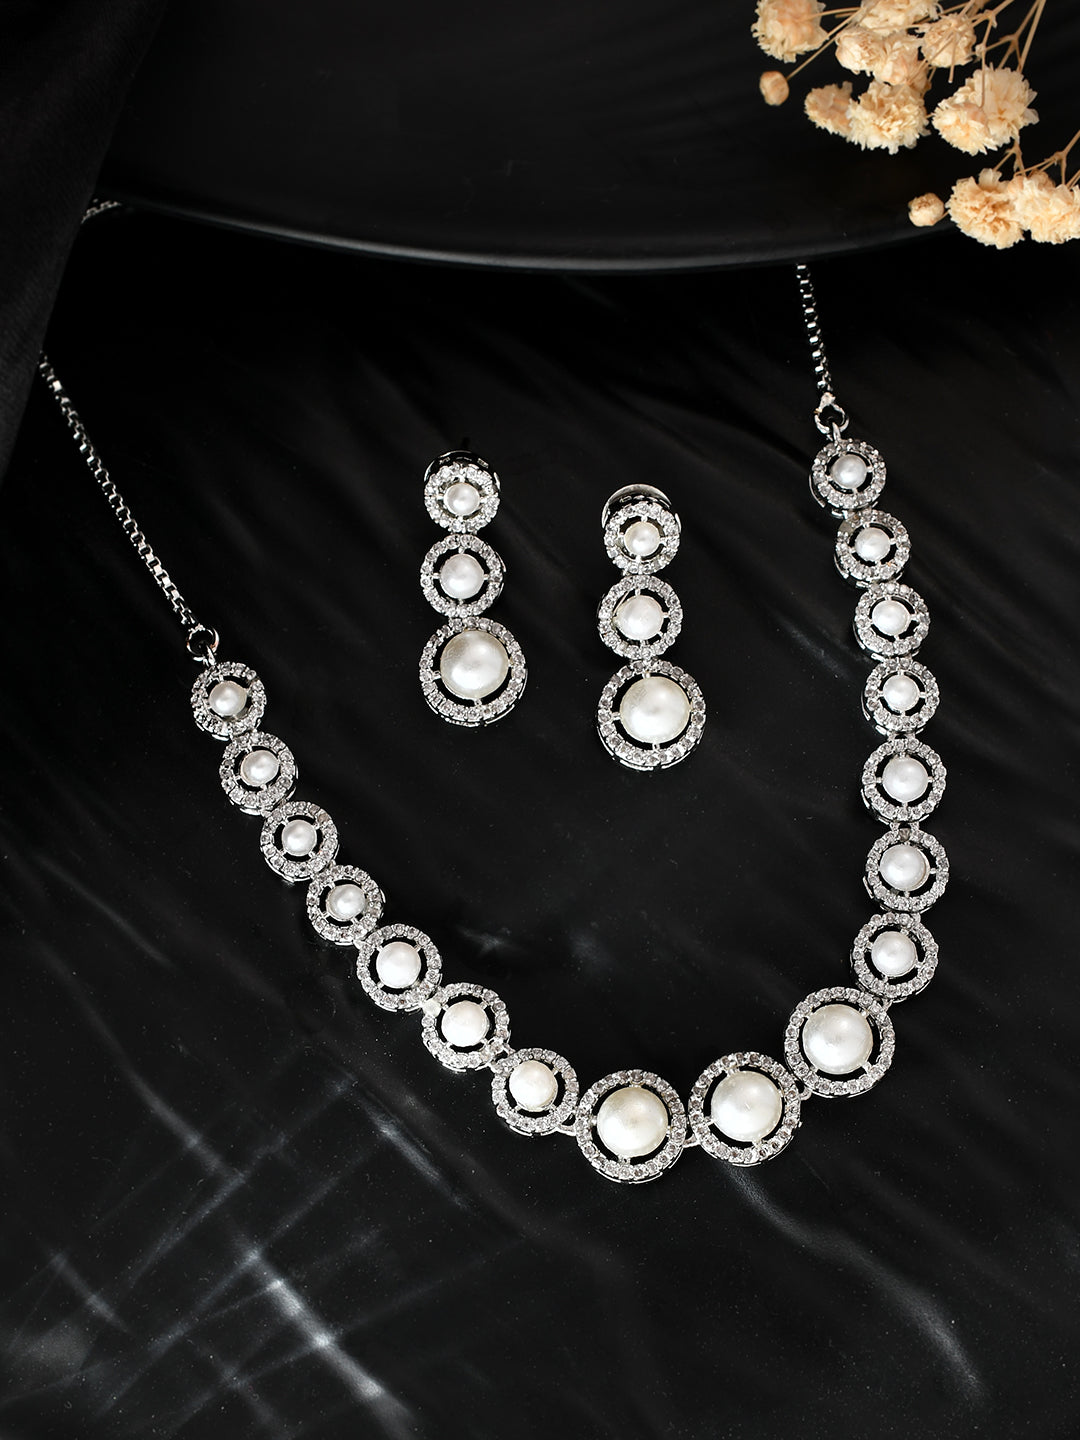 Shop This American Diamond jewellery set for women/girls features stunning and intricately crafted pieces that will elevate any outfit. Made with high-quality materials, this set exudes elegance and sophistication. Perfect for any occasion, this set will surely make a statement and add a touch of glamour to your look.